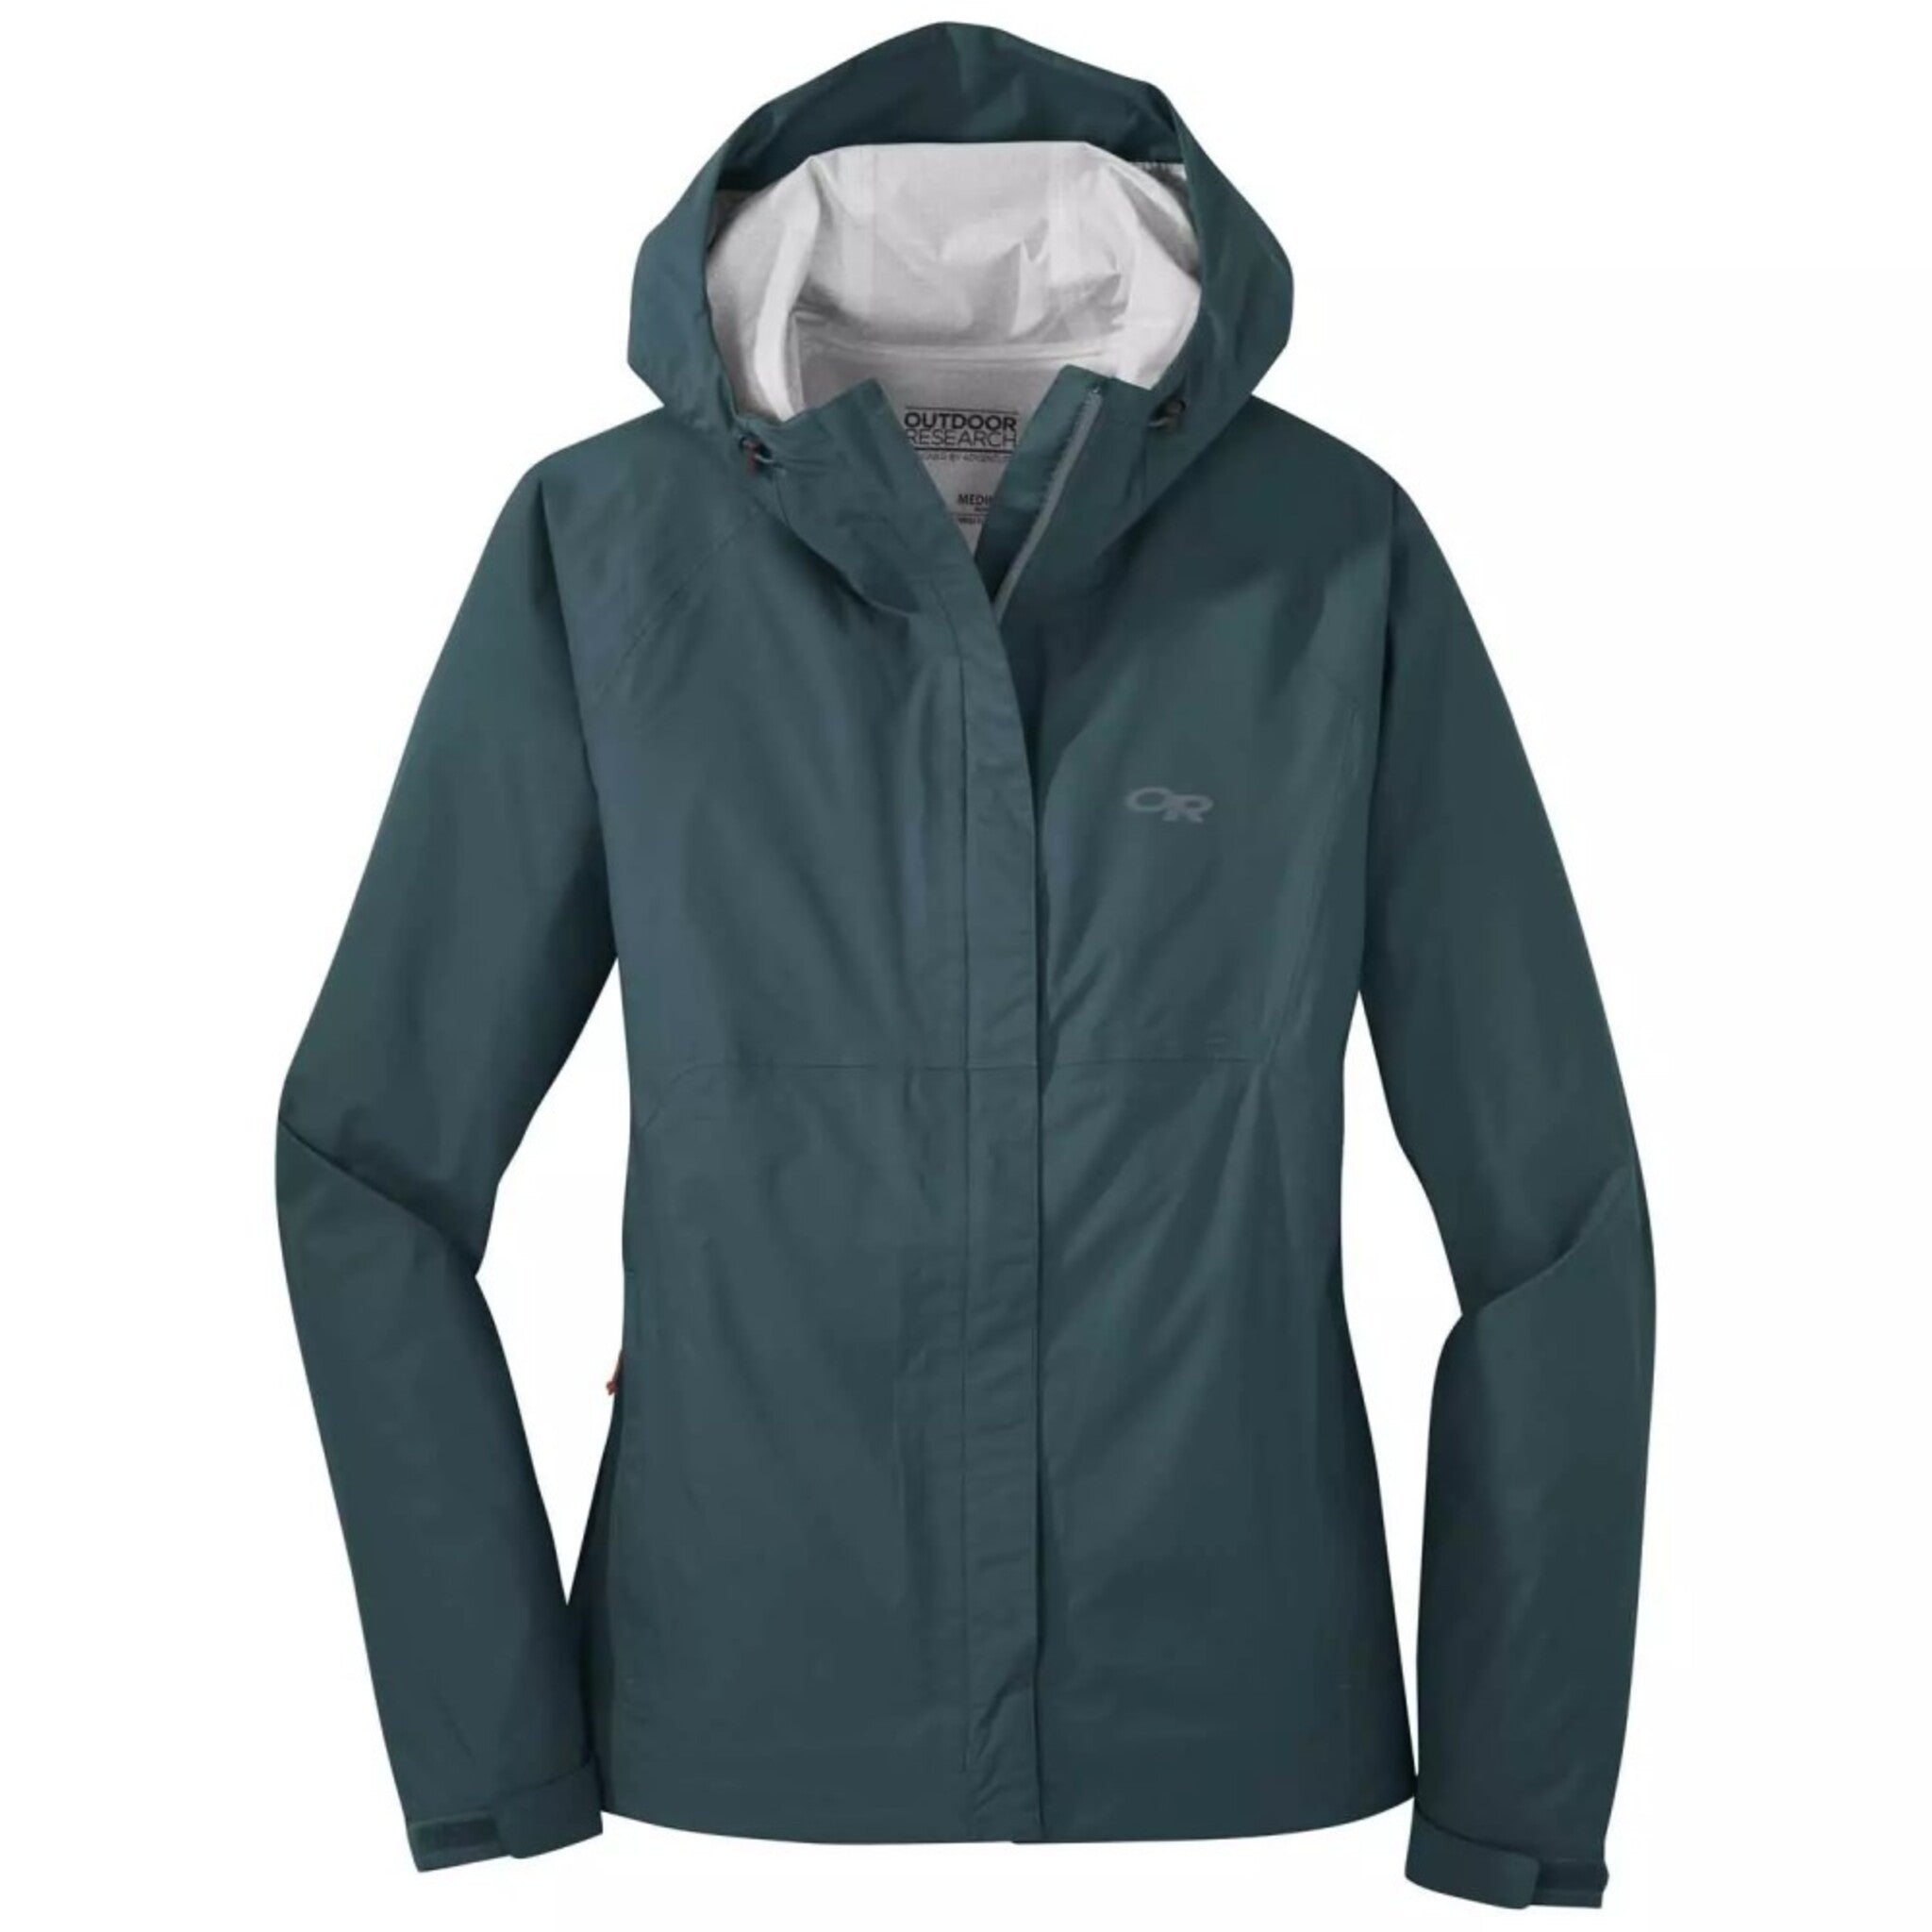 【Outdoor Research】APOLLO JACKET 女防水防風透氣連帽外套 橄欖綠 269185-1769